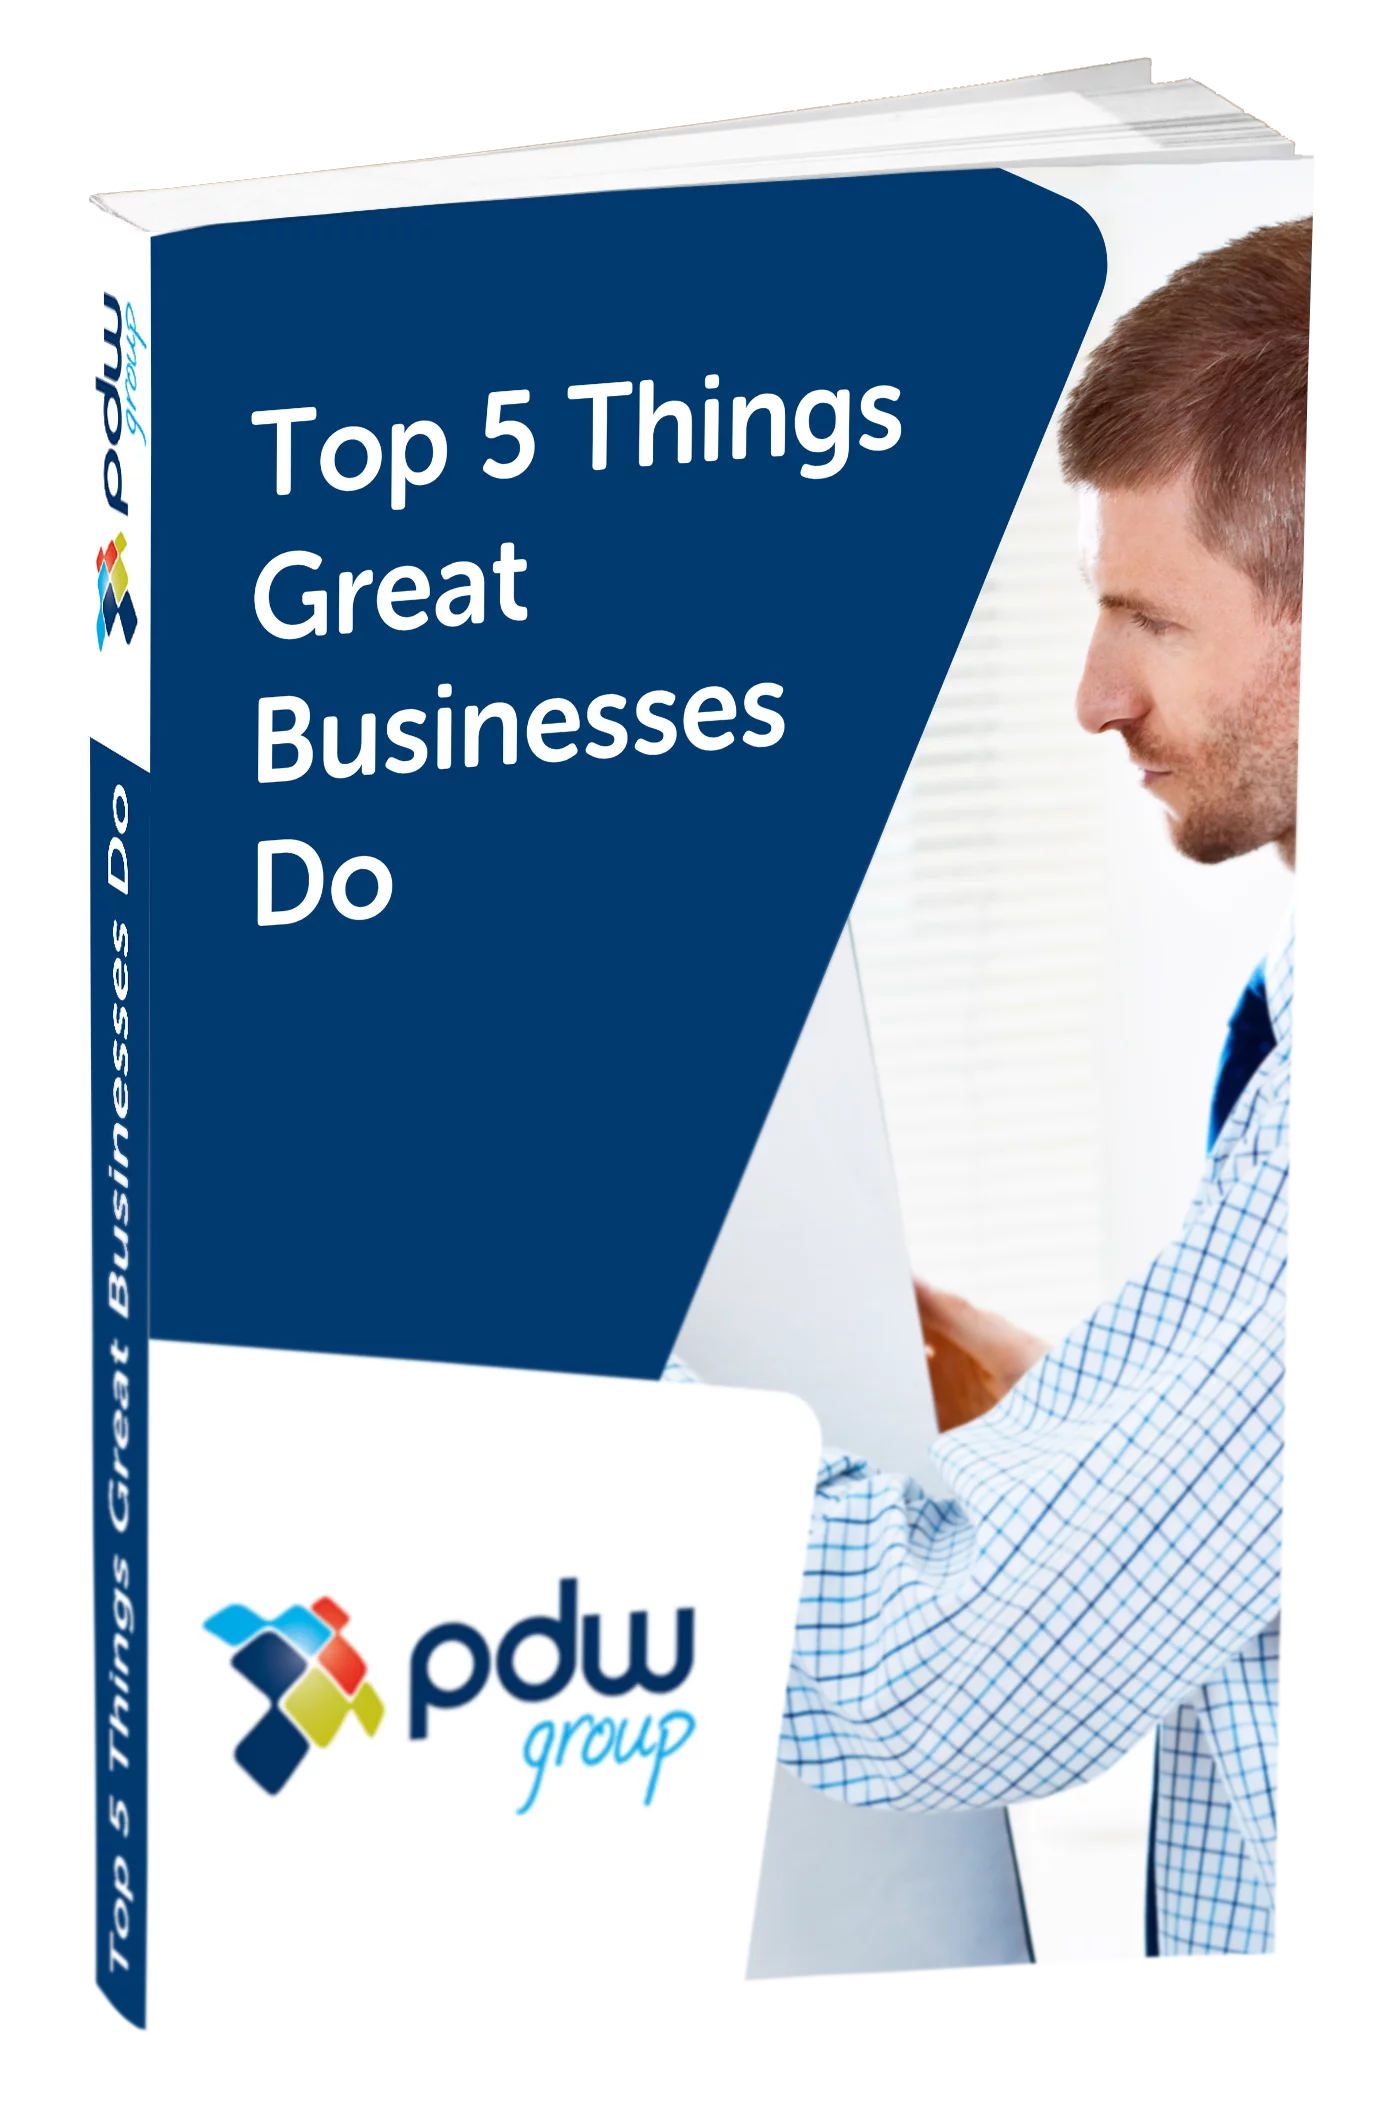 Download Your FREE Top 5 Things Great Businesses Do Guide